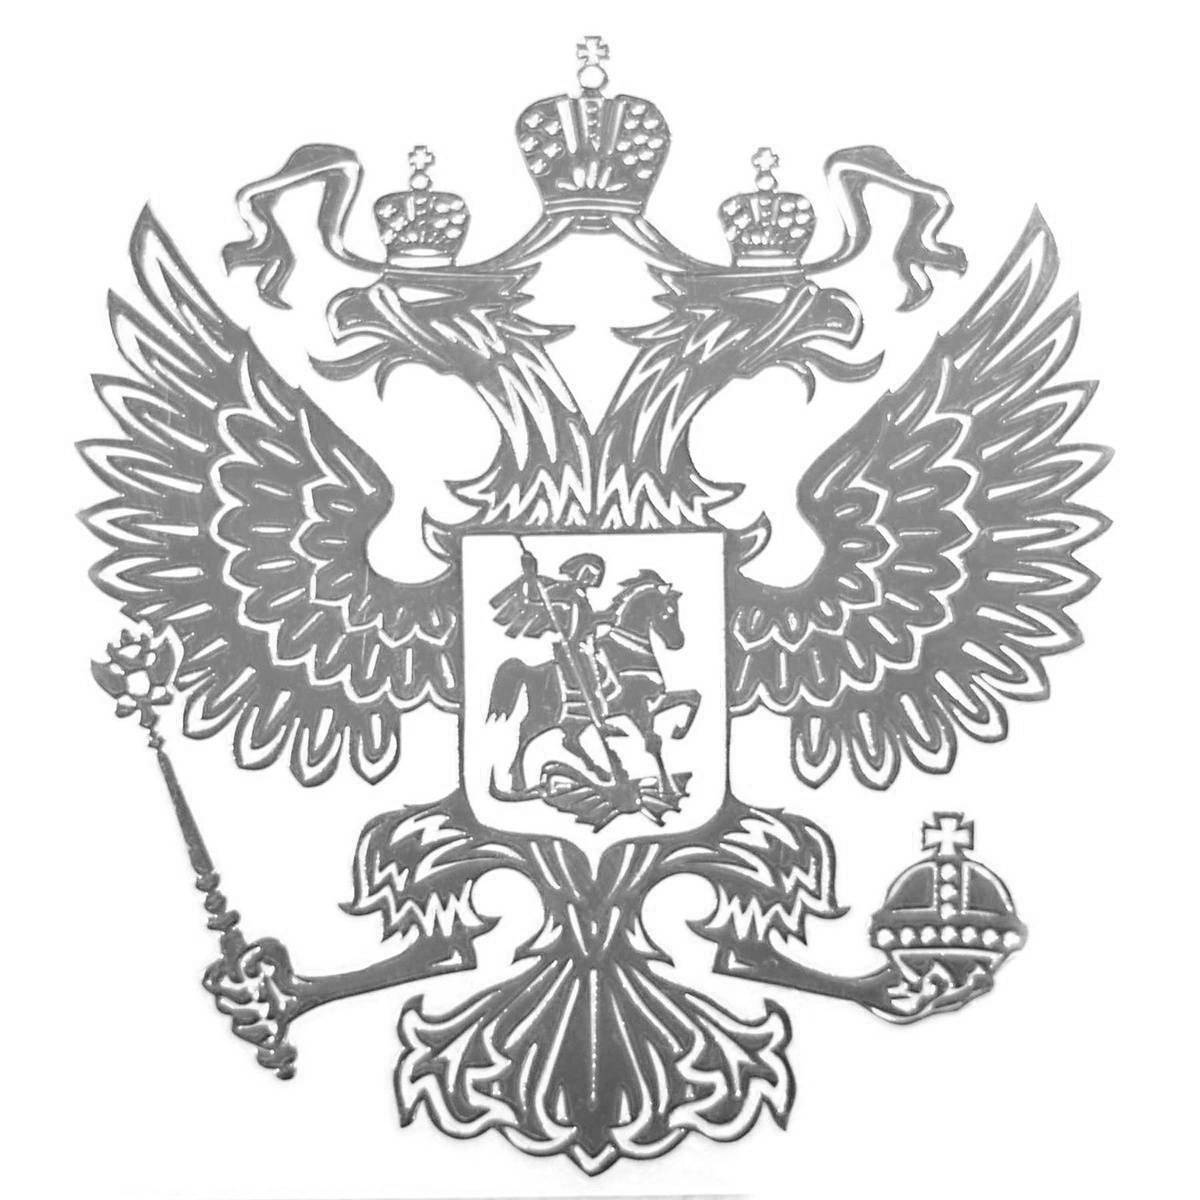 Playful coat of arms of Russia for preschoolers